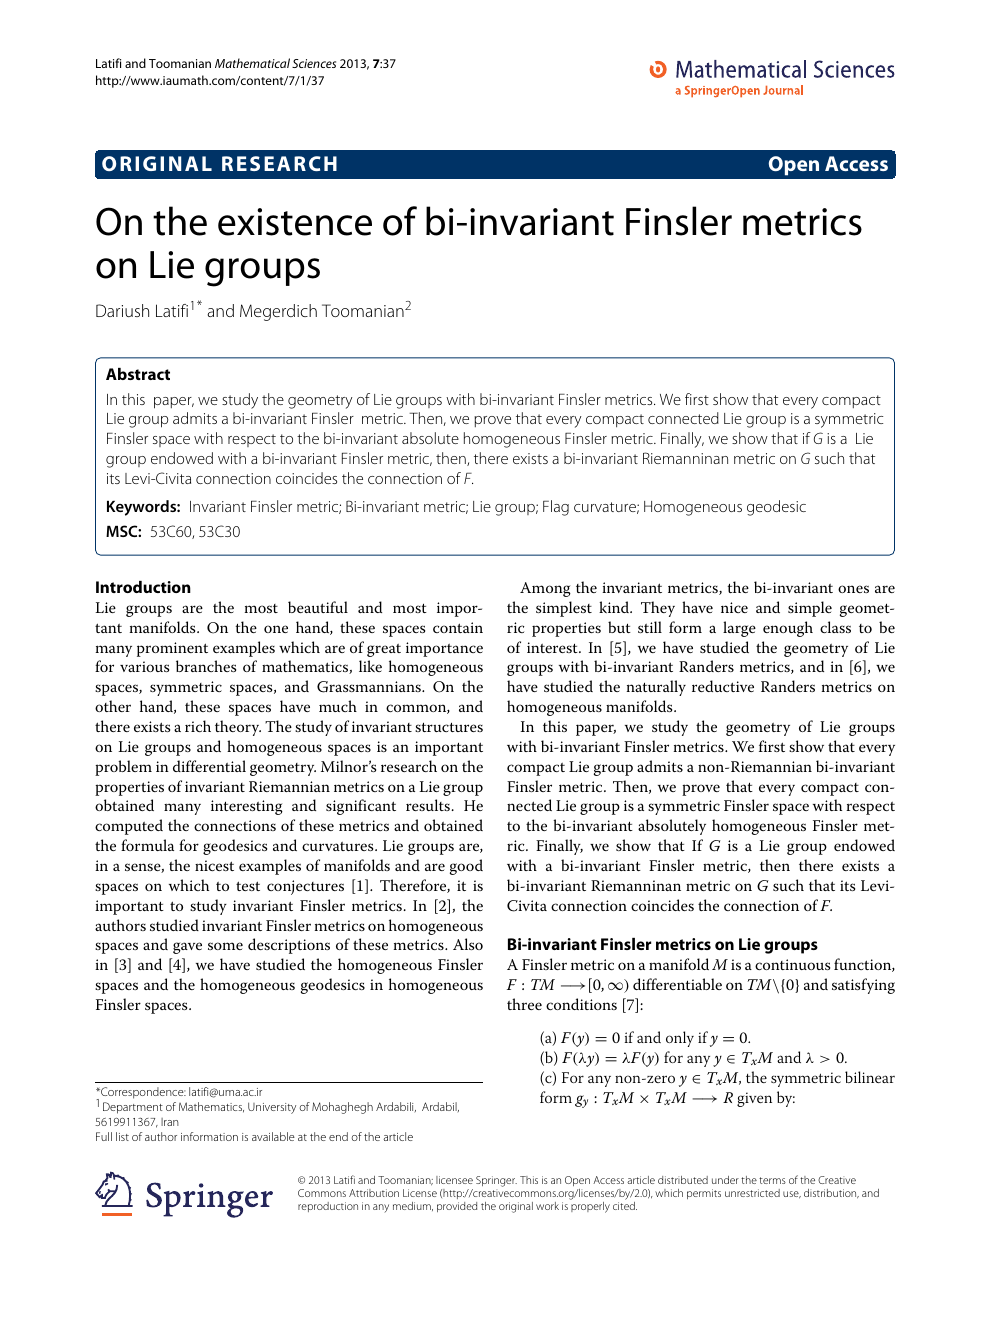 On The Existence Of Bi Invariant Finsler Metrics On Lie Groups Topic Of Research Paper In Mathematics Download Scholarly Article Pdf And Read For Free On Cyberleninka Open Science Hub